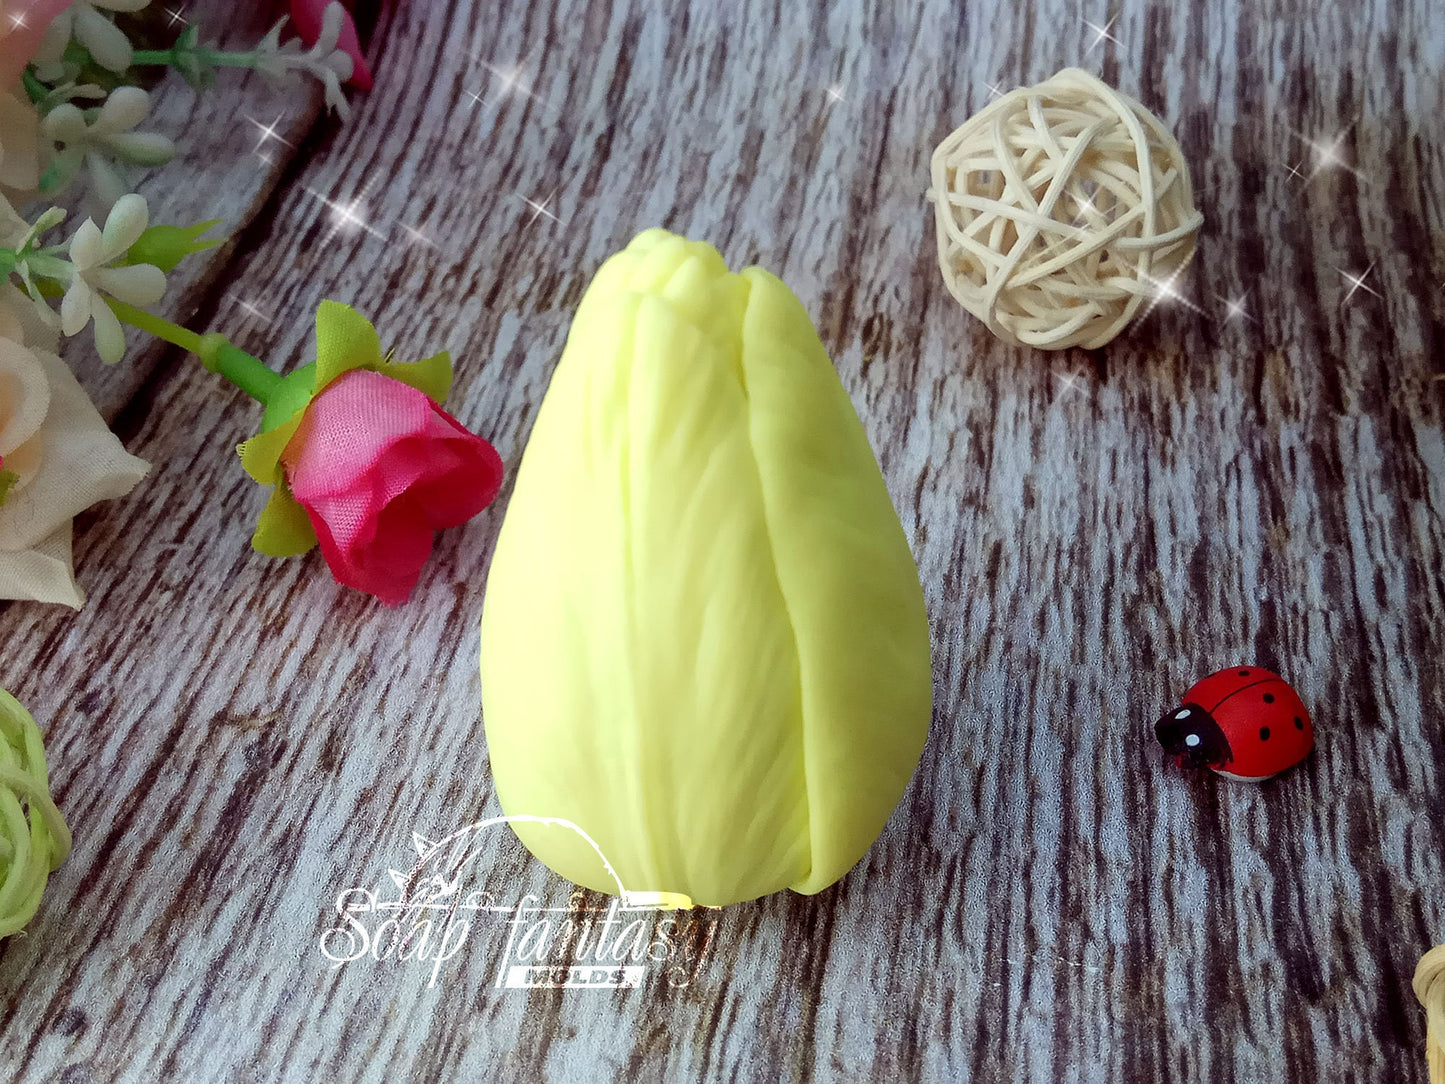 Tulip Sweetheart bud silicone mold for soap making